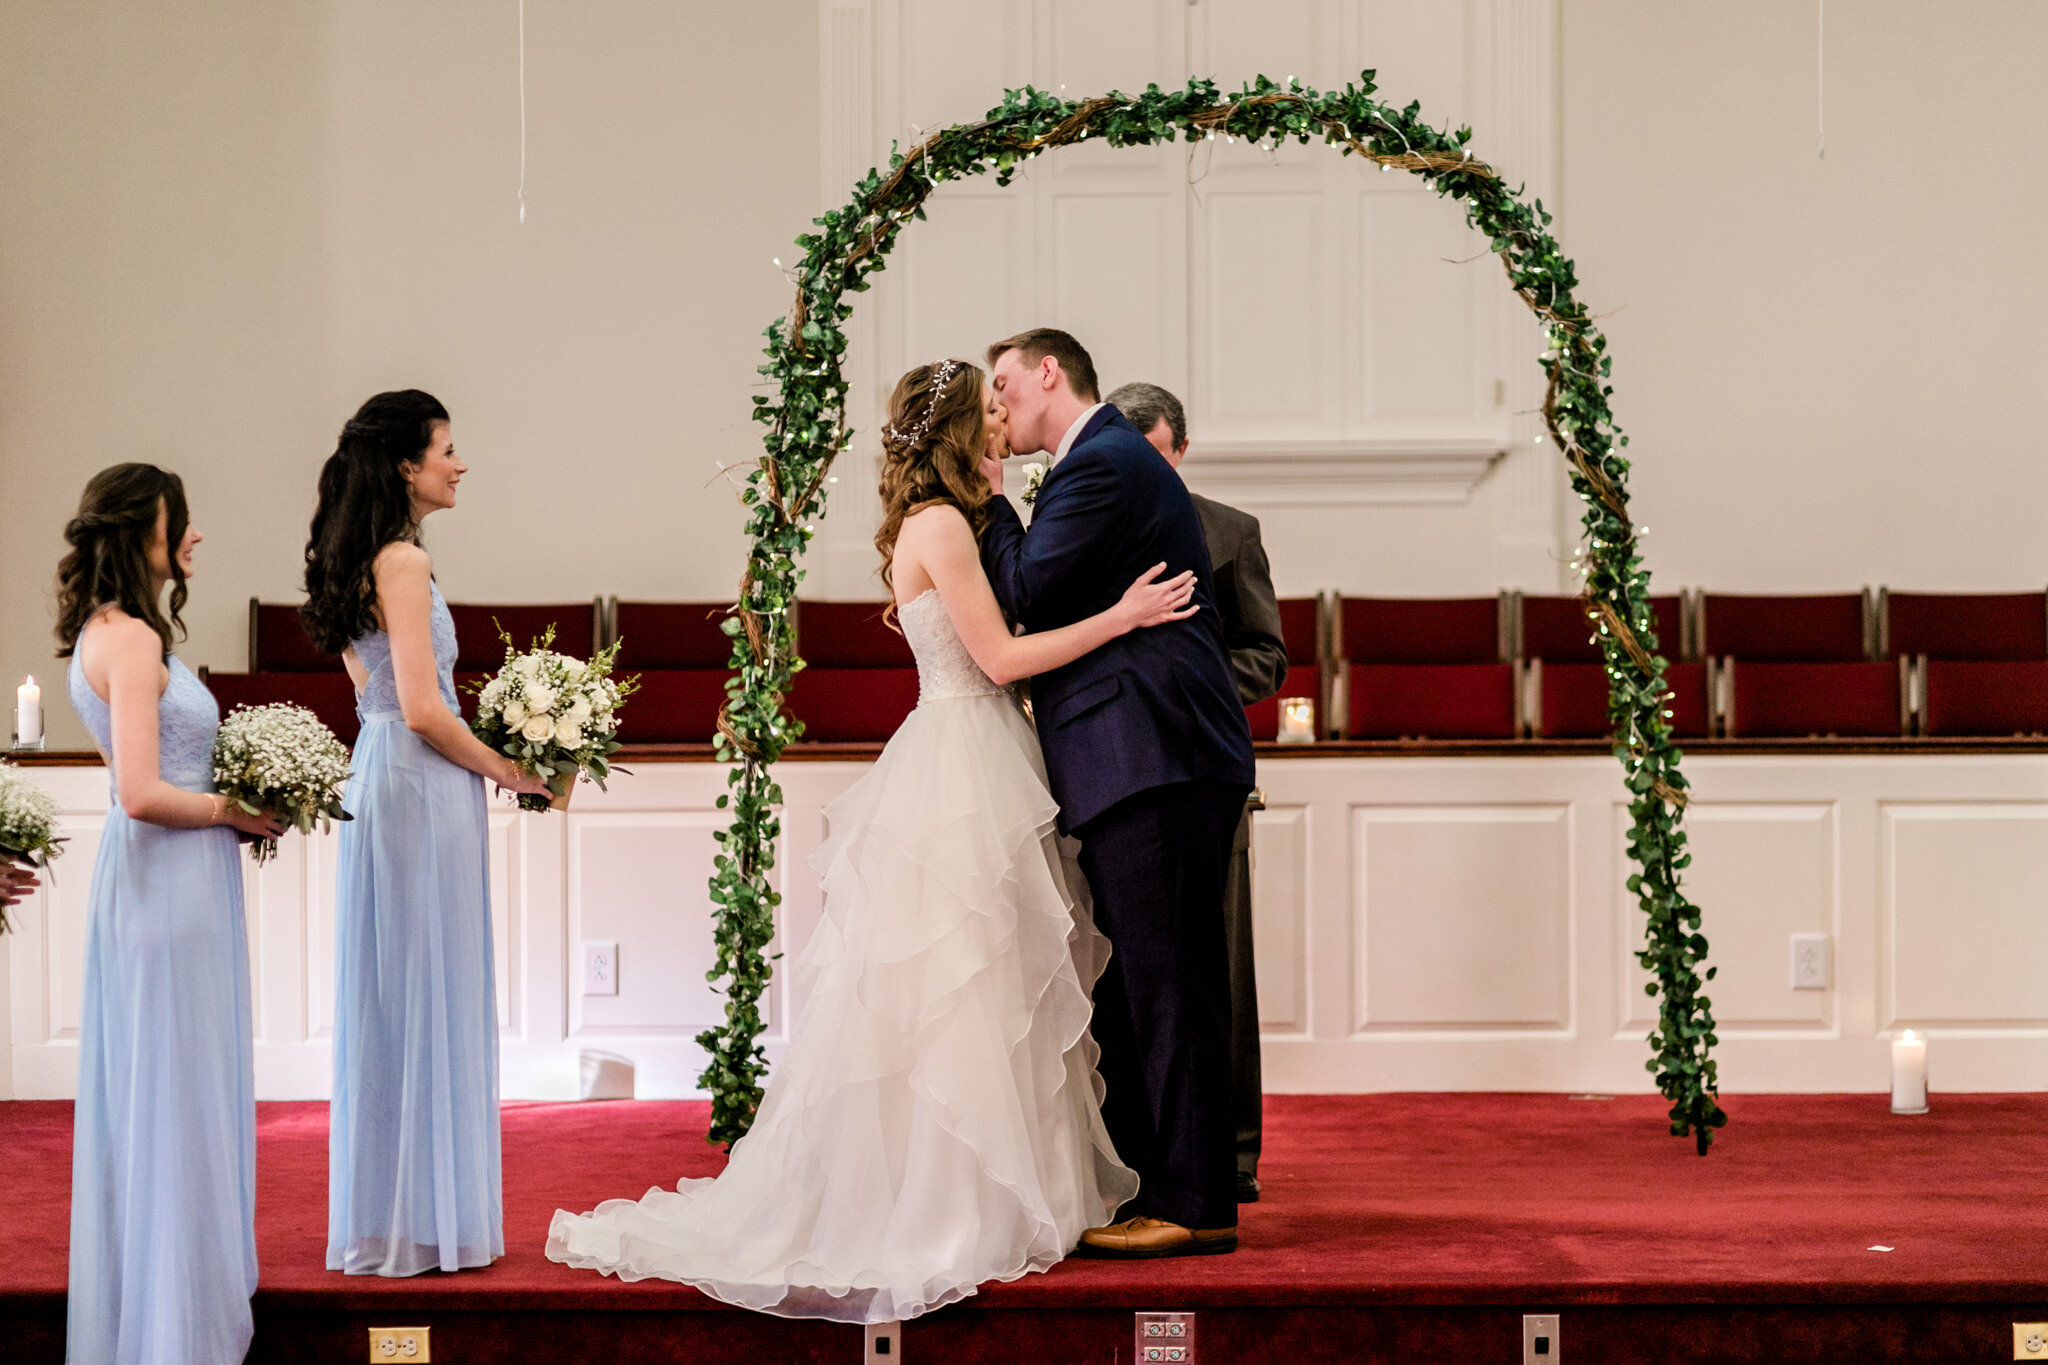 Durham Wedding Photographer | By G. Lin Photography | Bride and groom kiss